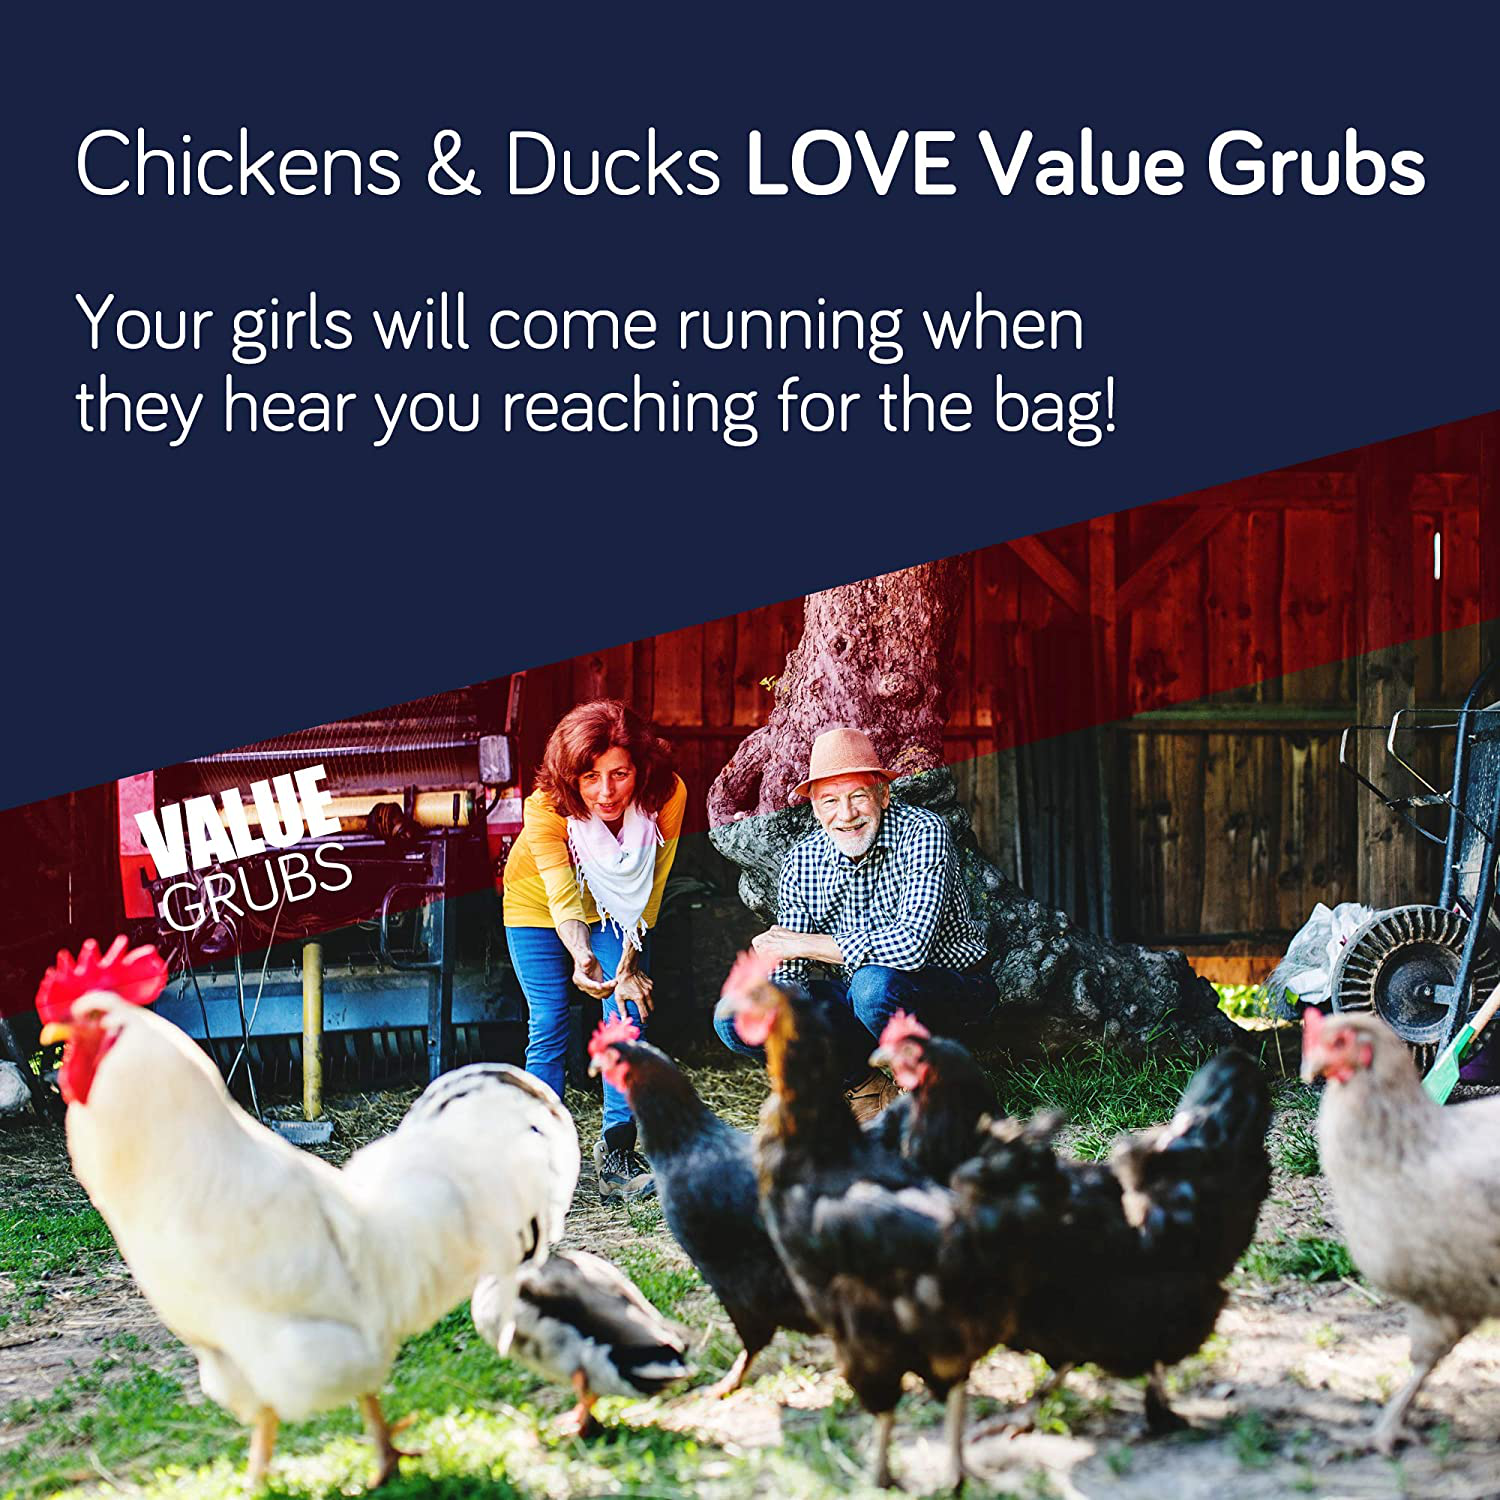 Value Grubs 4 Lbs - Better than Dried Mealworms for Chickens - Non-Gmo & 75X More Calcium than Meal Worms - Chicken Feed & Molting Supplement - BSF Larvae Treats for Hens, Ducks, Wild Birds